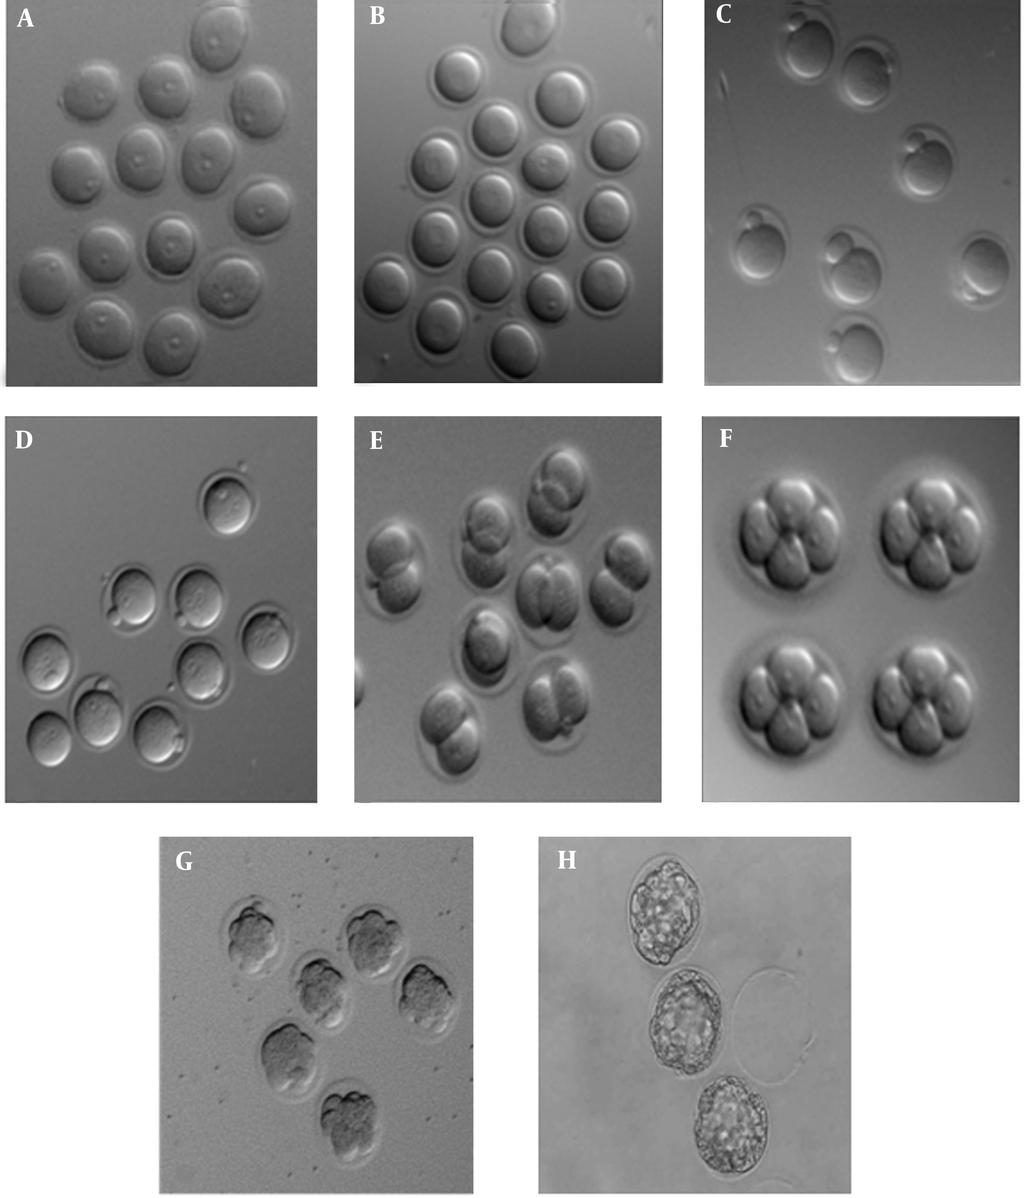 68%, P <.5). The percentages of embryos, 2-cell, 4-cell, 8-cell and blastocyst in the control group were 82.4, 71.4, 67.5, and 37, respectively and in vitrified group they were 68, 61.8, 52.4, and 27.